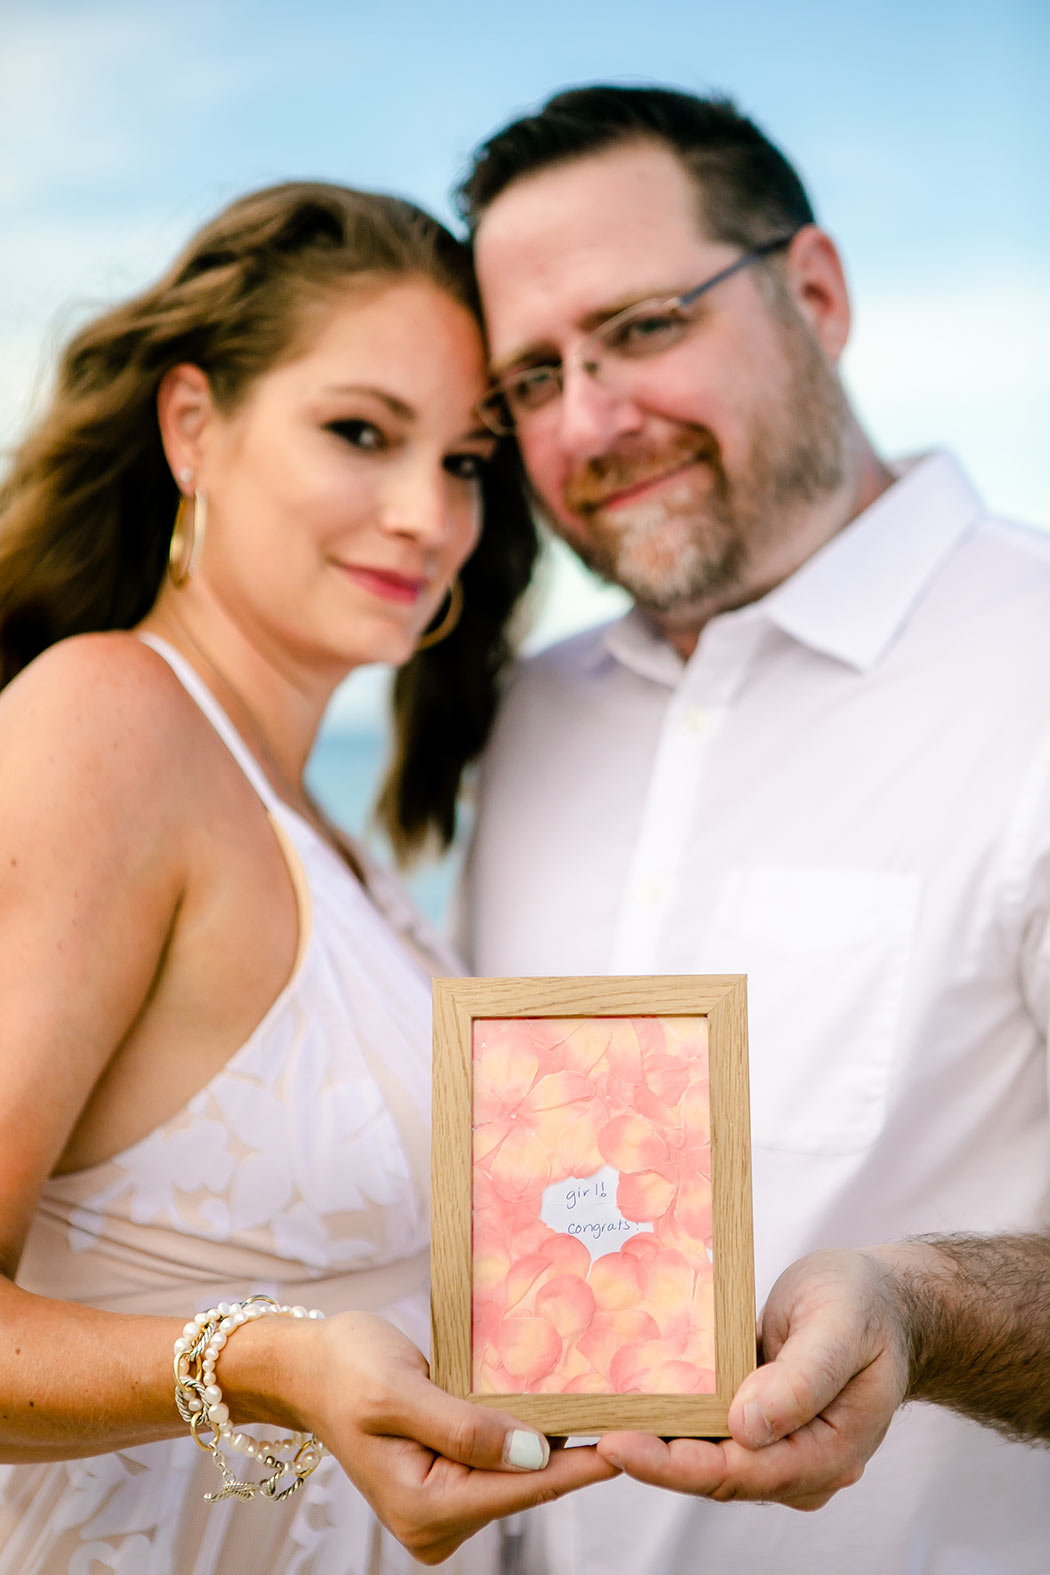 pregnancy announcement idea | its a girl | fort lauderdale beach maternity photoshoot